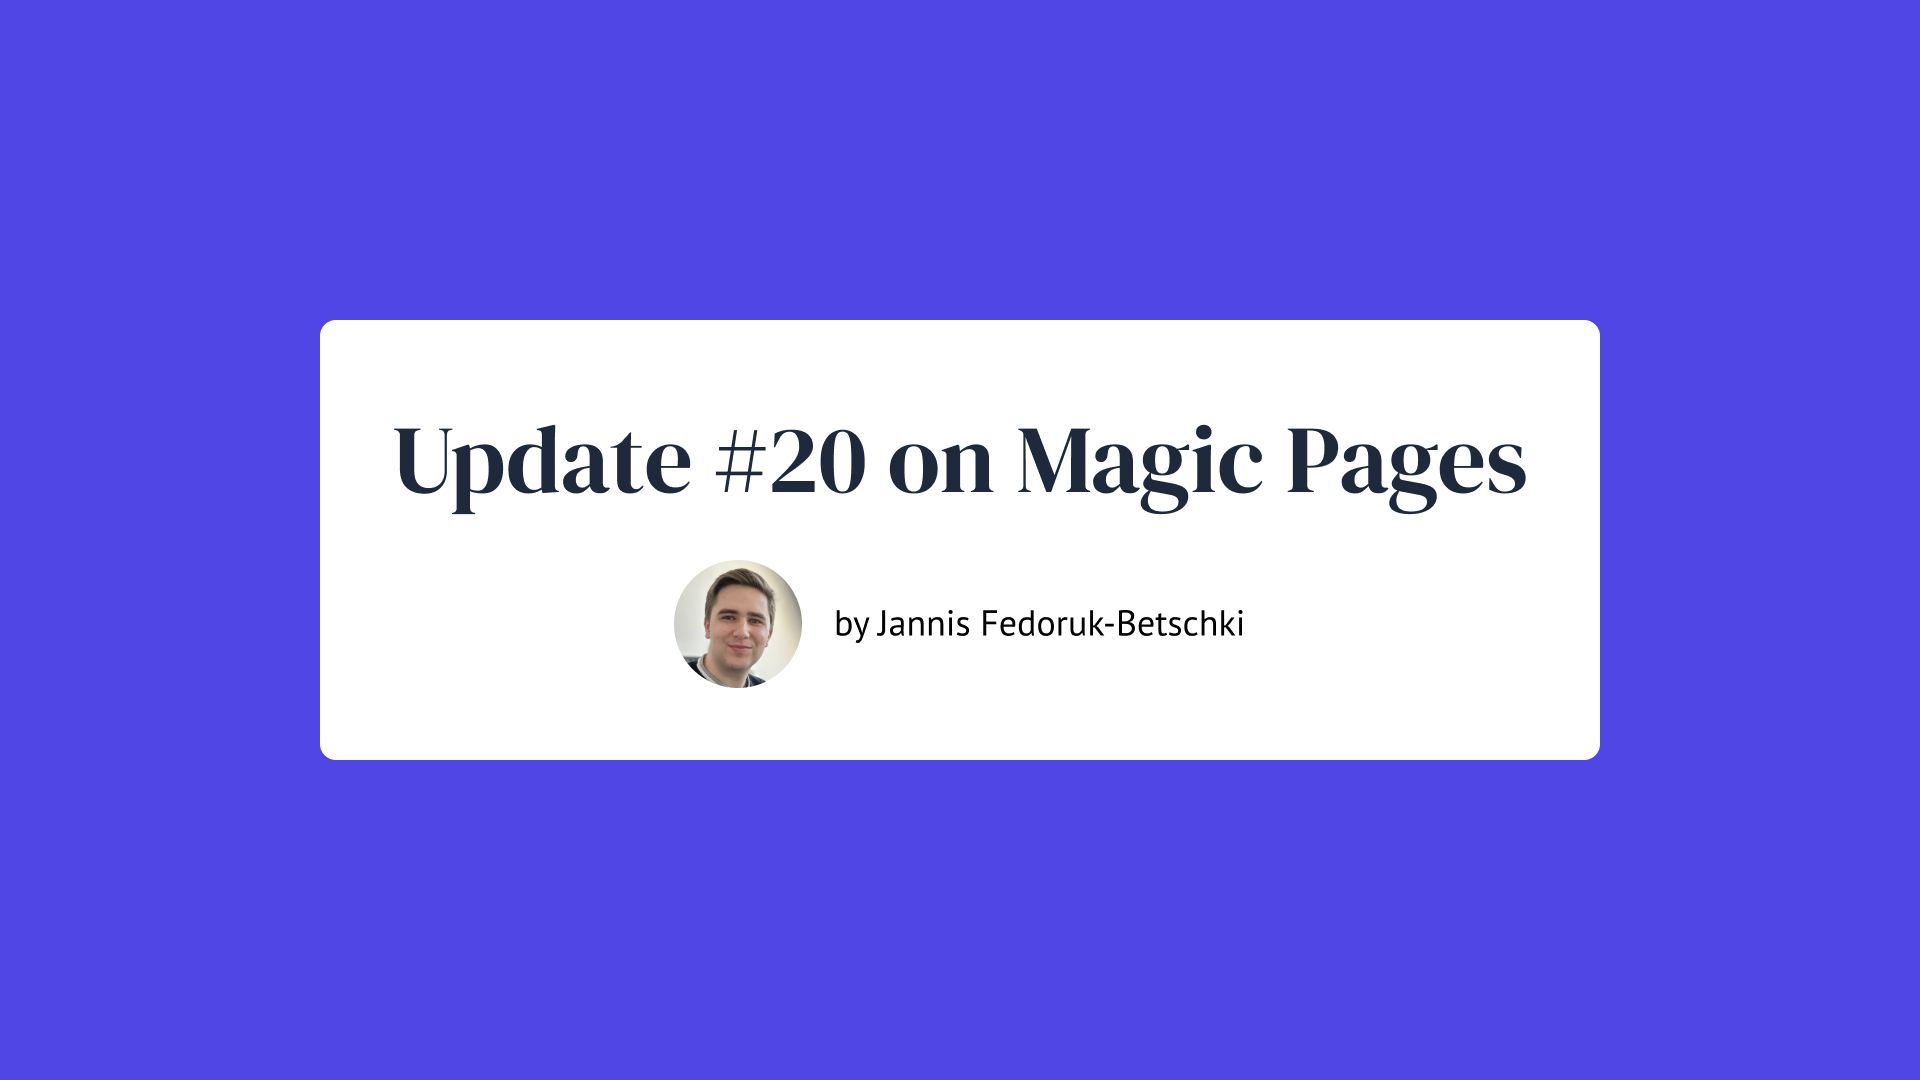 Update #20 on Magic Pages by Jannis Fedoruk-Betschki